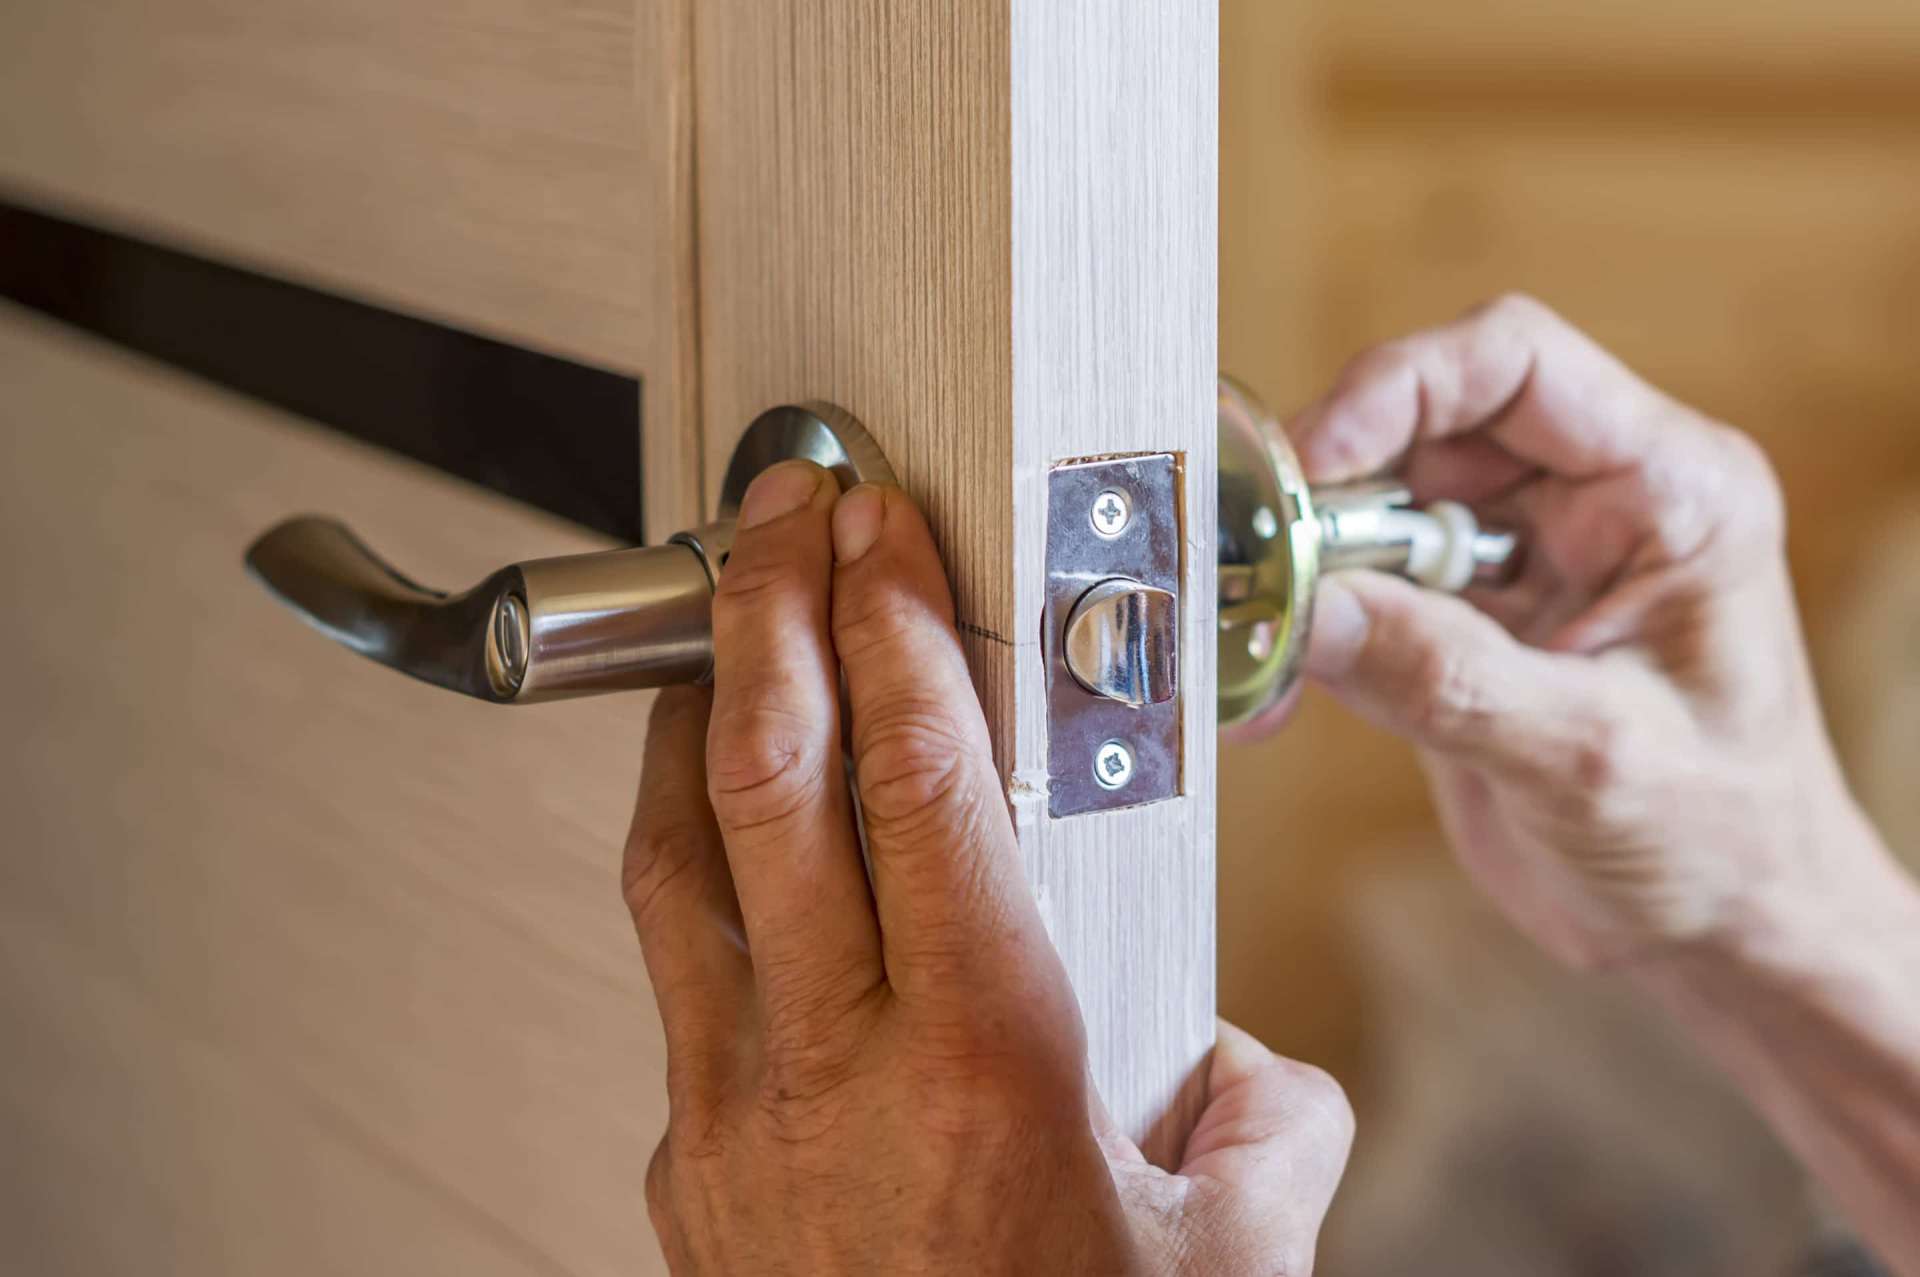 10 Questions to Ask About How an Apartment is Prepared | Locks Being Changed | www.phillyaptrentals.com changing locks apartment